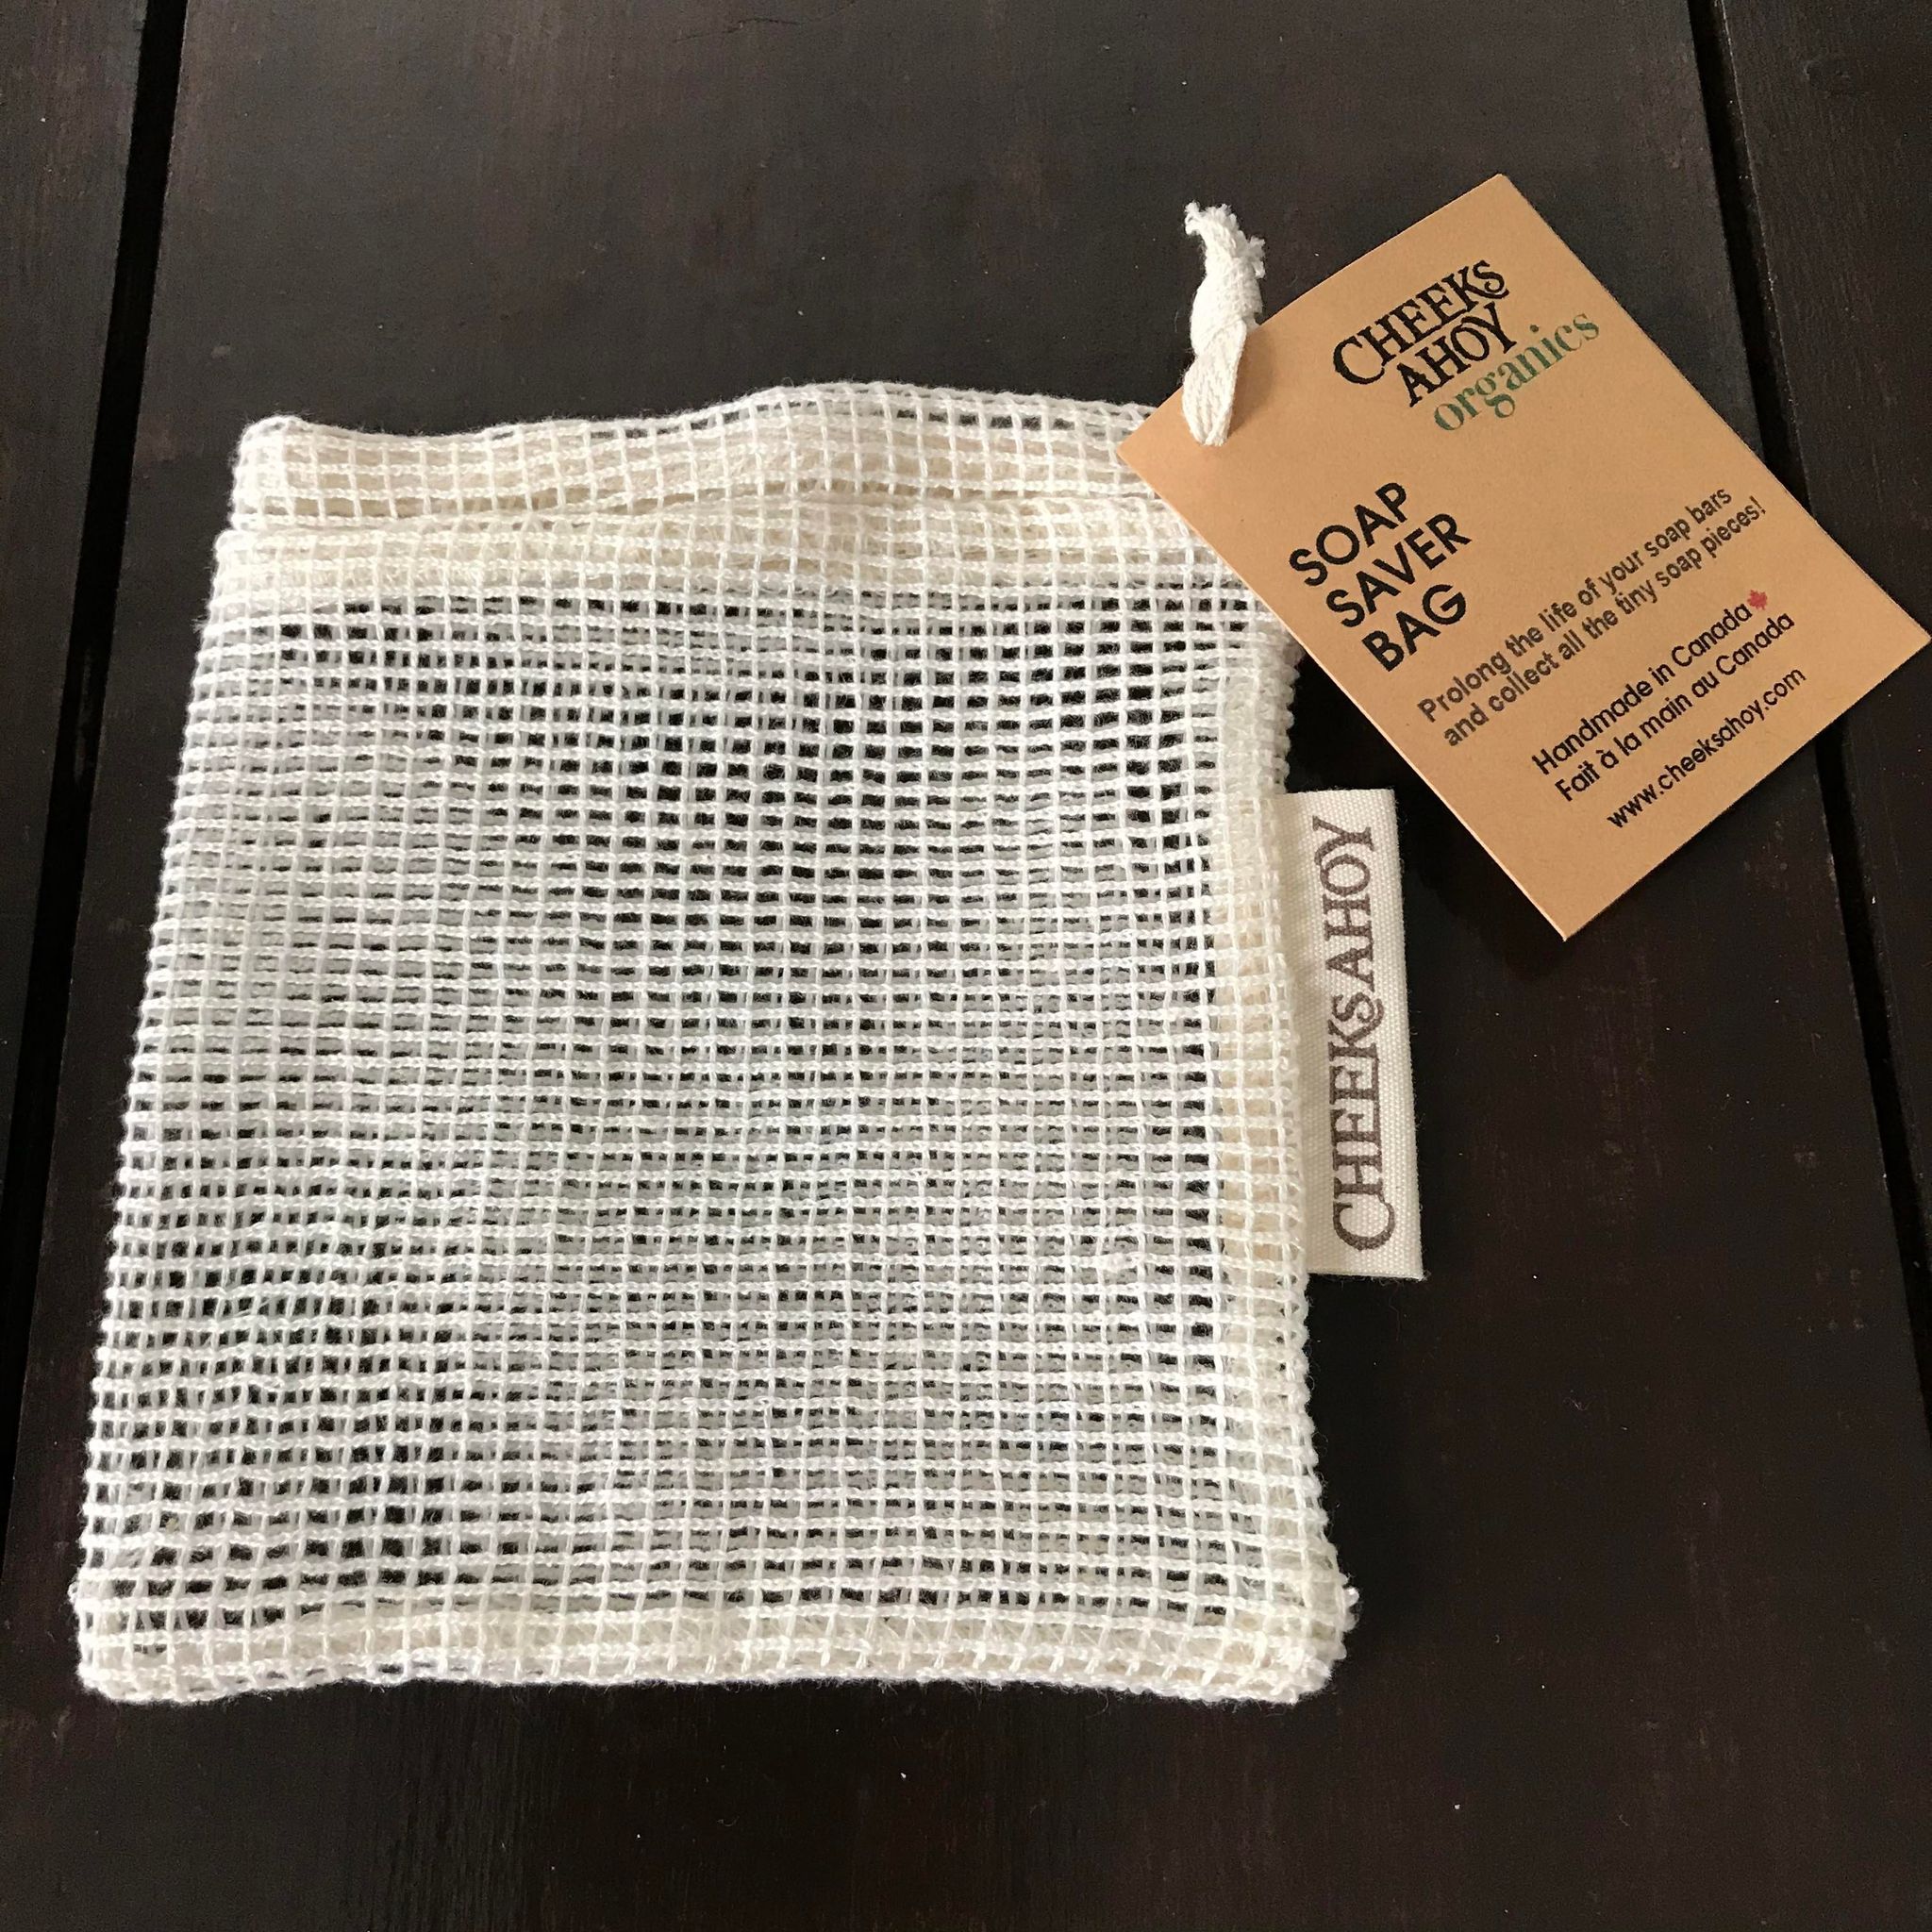 Prolong the life of your soap bars and collect all the tiny soap pieces in a mesh soap saver bag made in Canada of organic cotton and handmade by Cheeks Ahoy